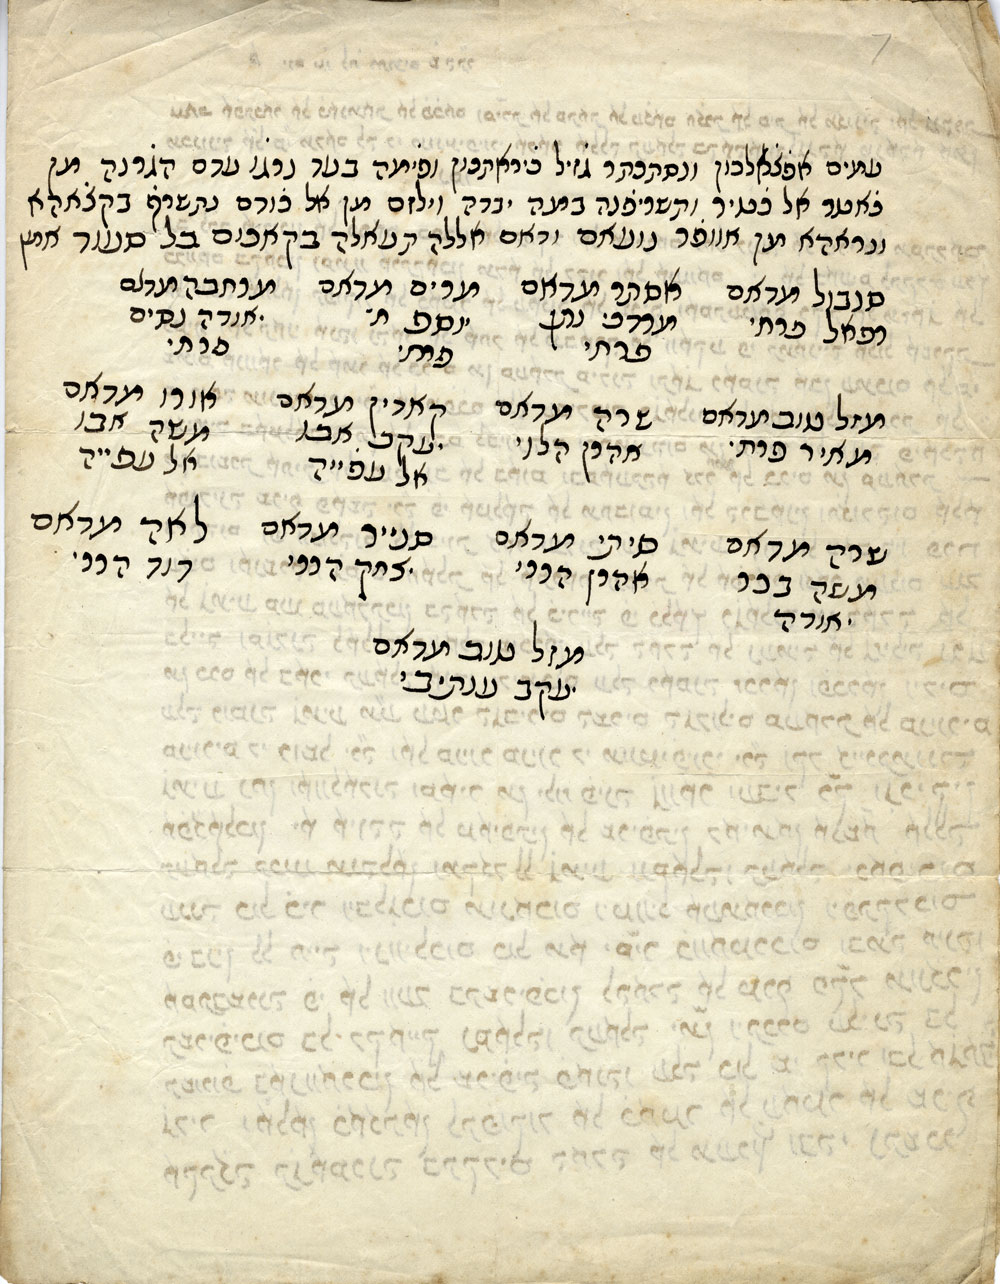 Signatures of the women from the Damascus Jewish community at the end of their letter to Lady Judith Montefiore 